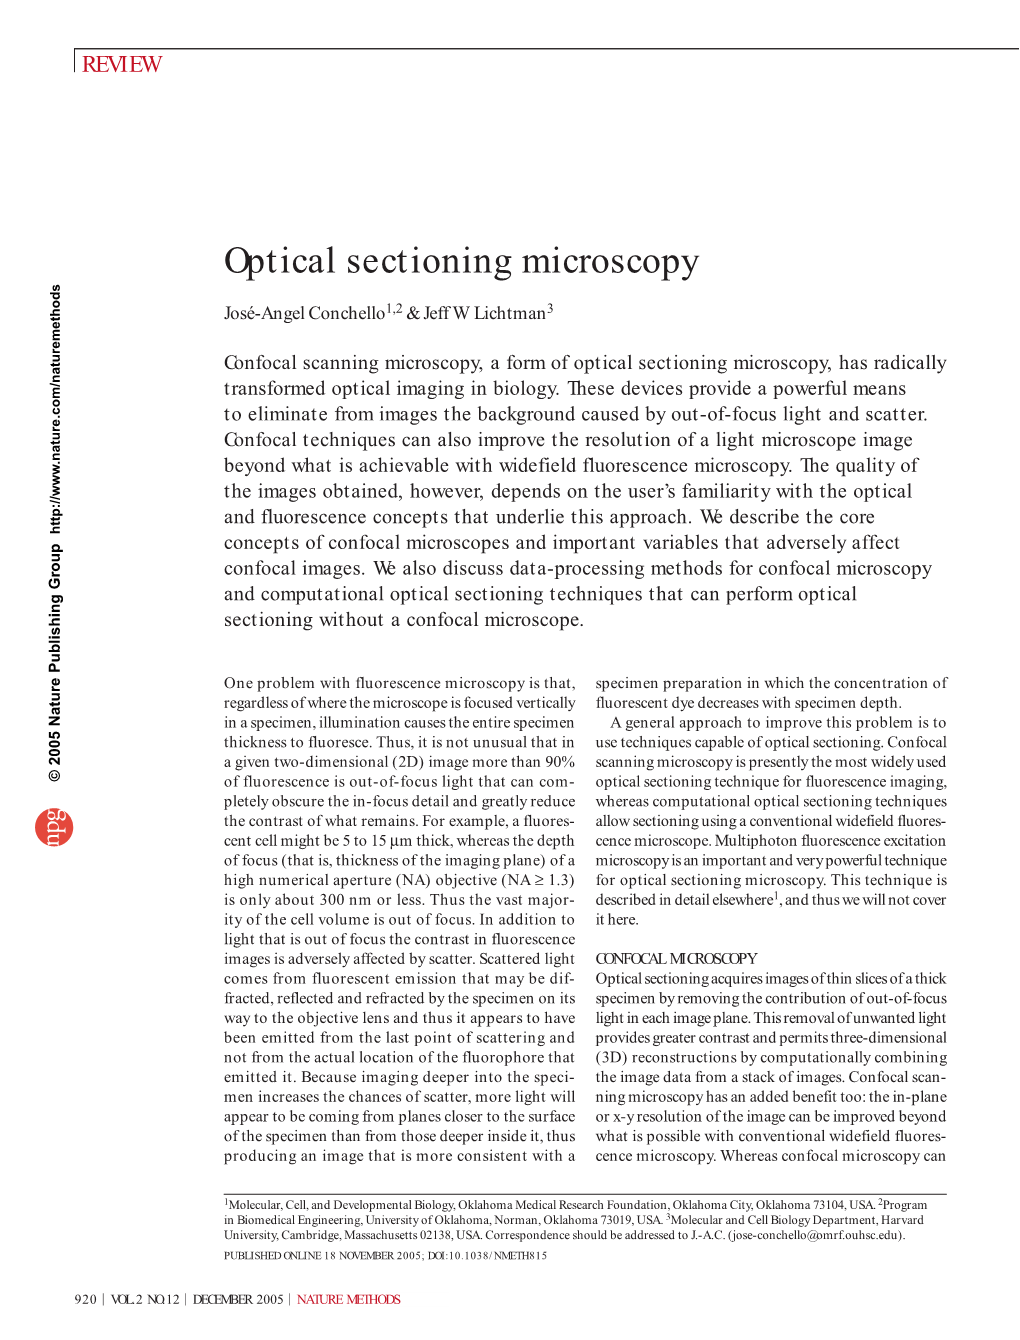 Optical Sectioning Microscopy